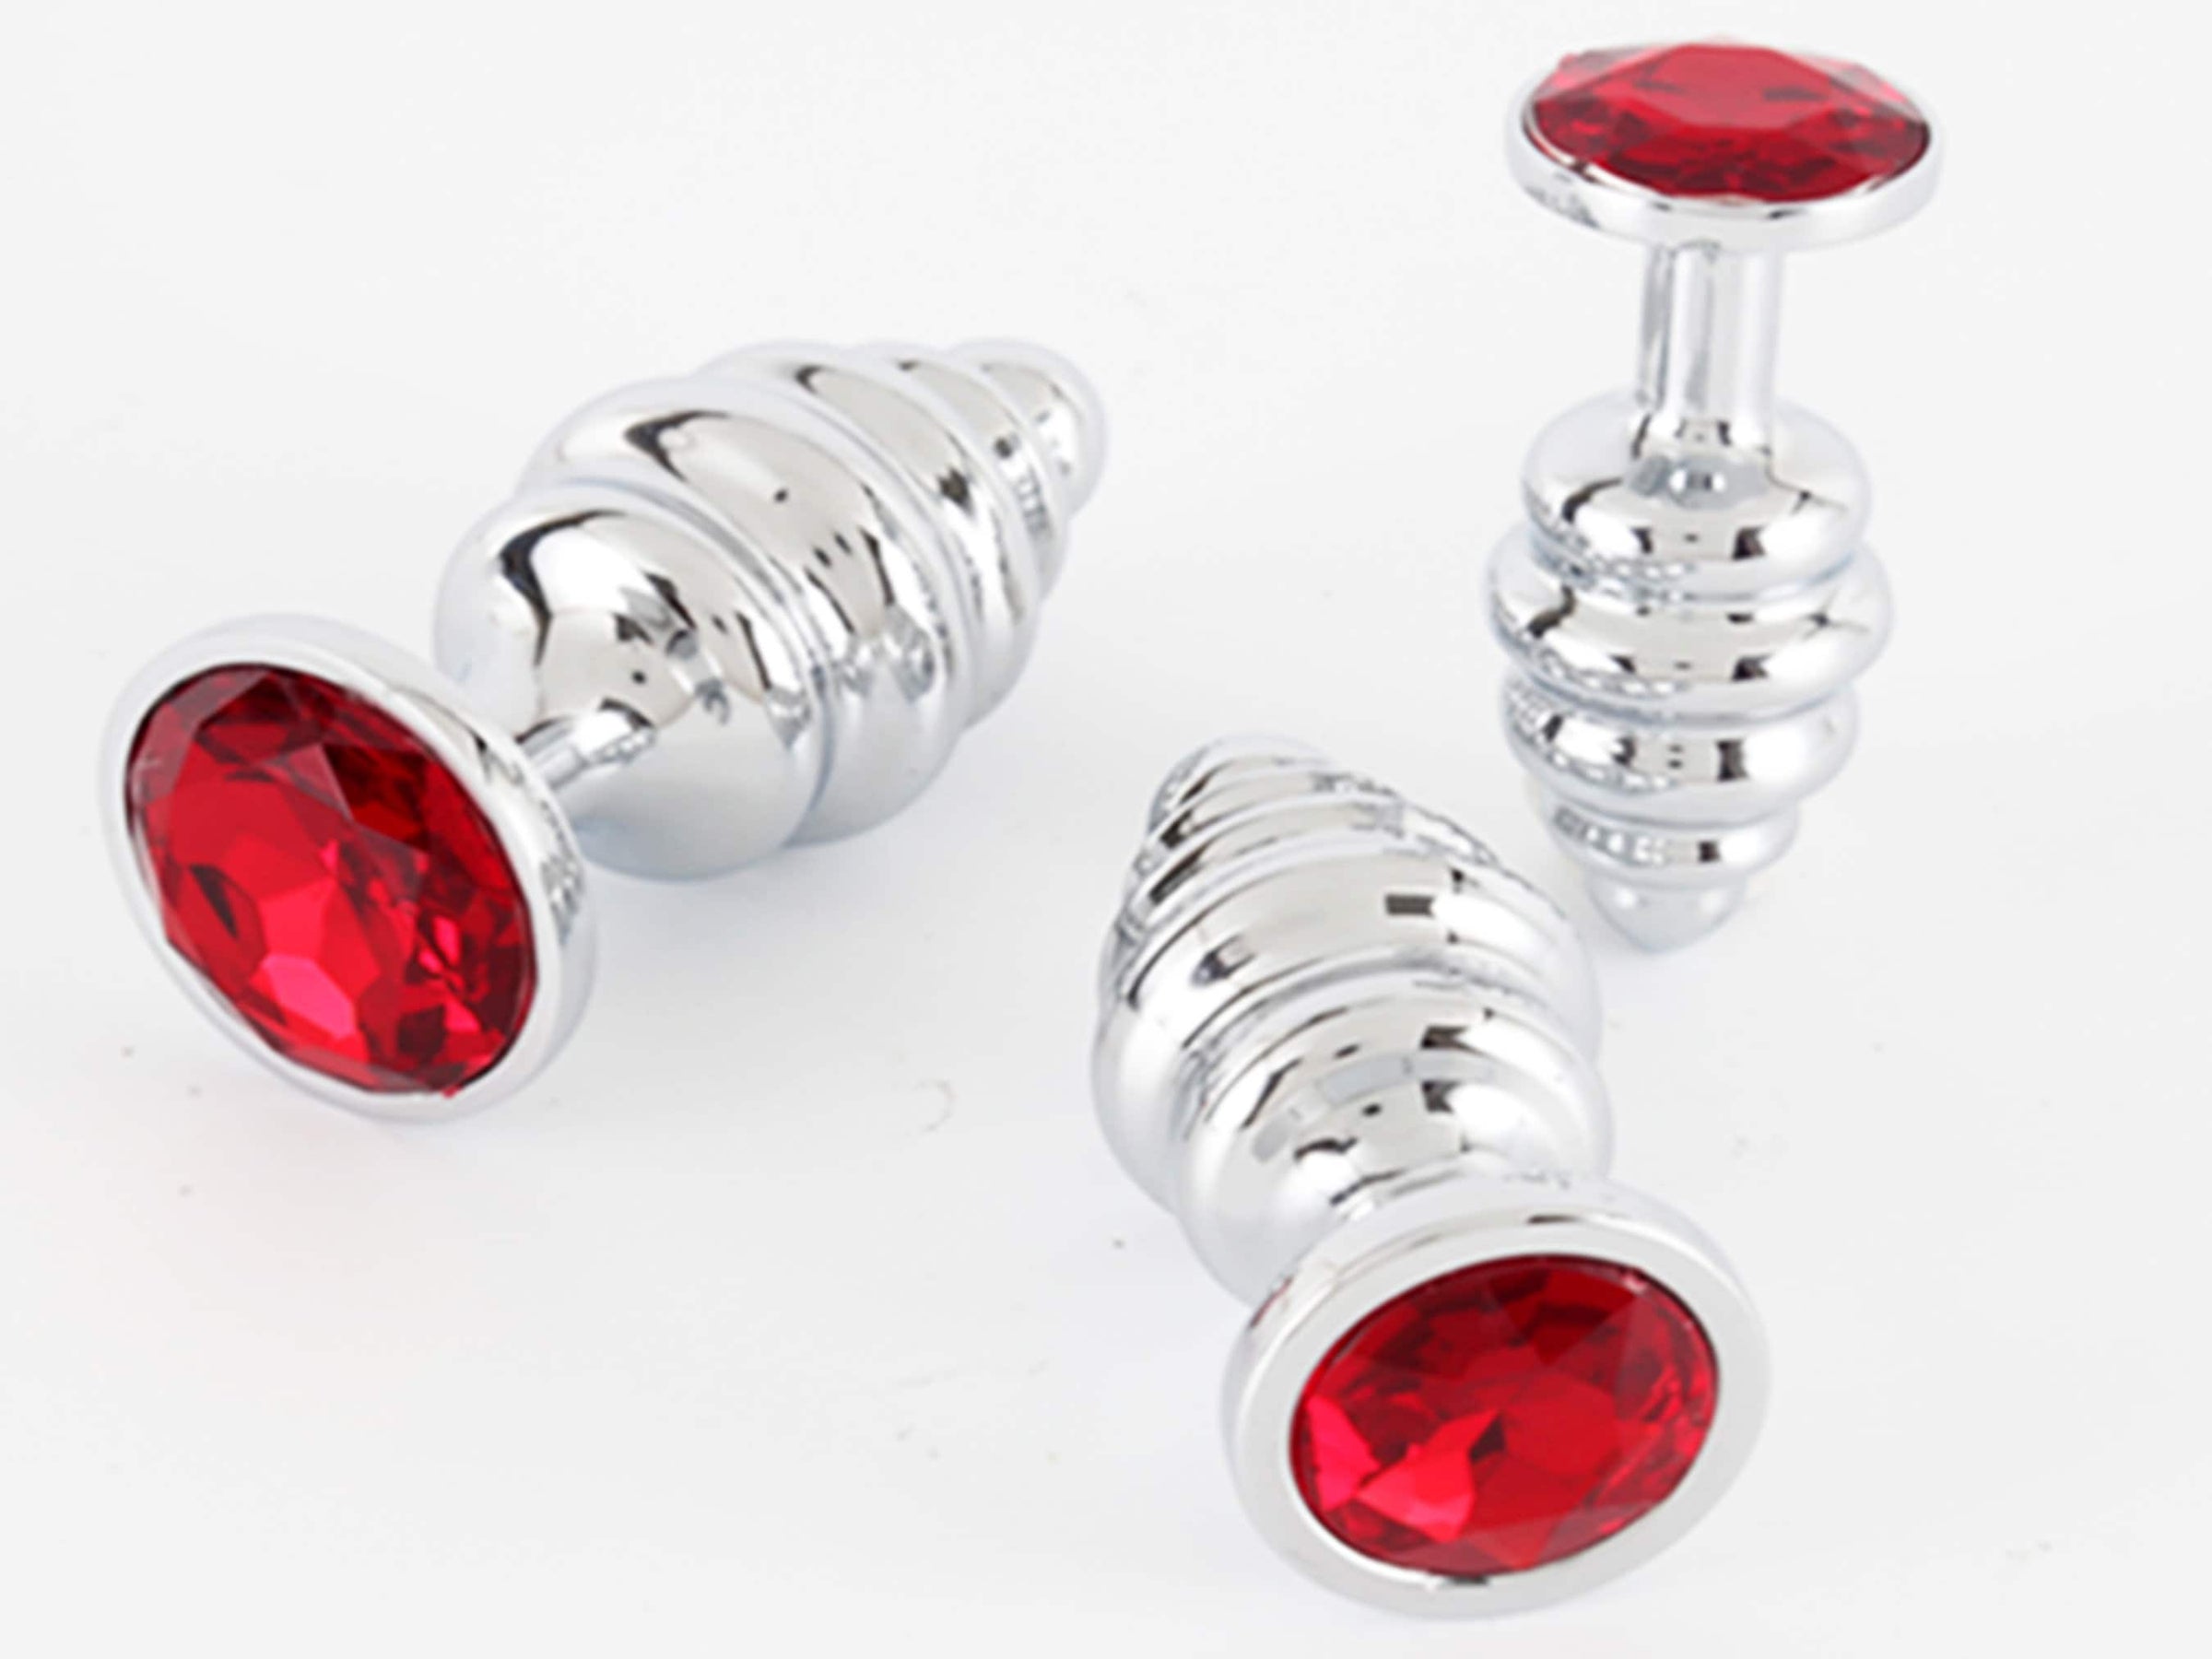 RED Acrylic Crystal Butt Honeycomb Screw based plug 3 sizes anal toy s photo picture